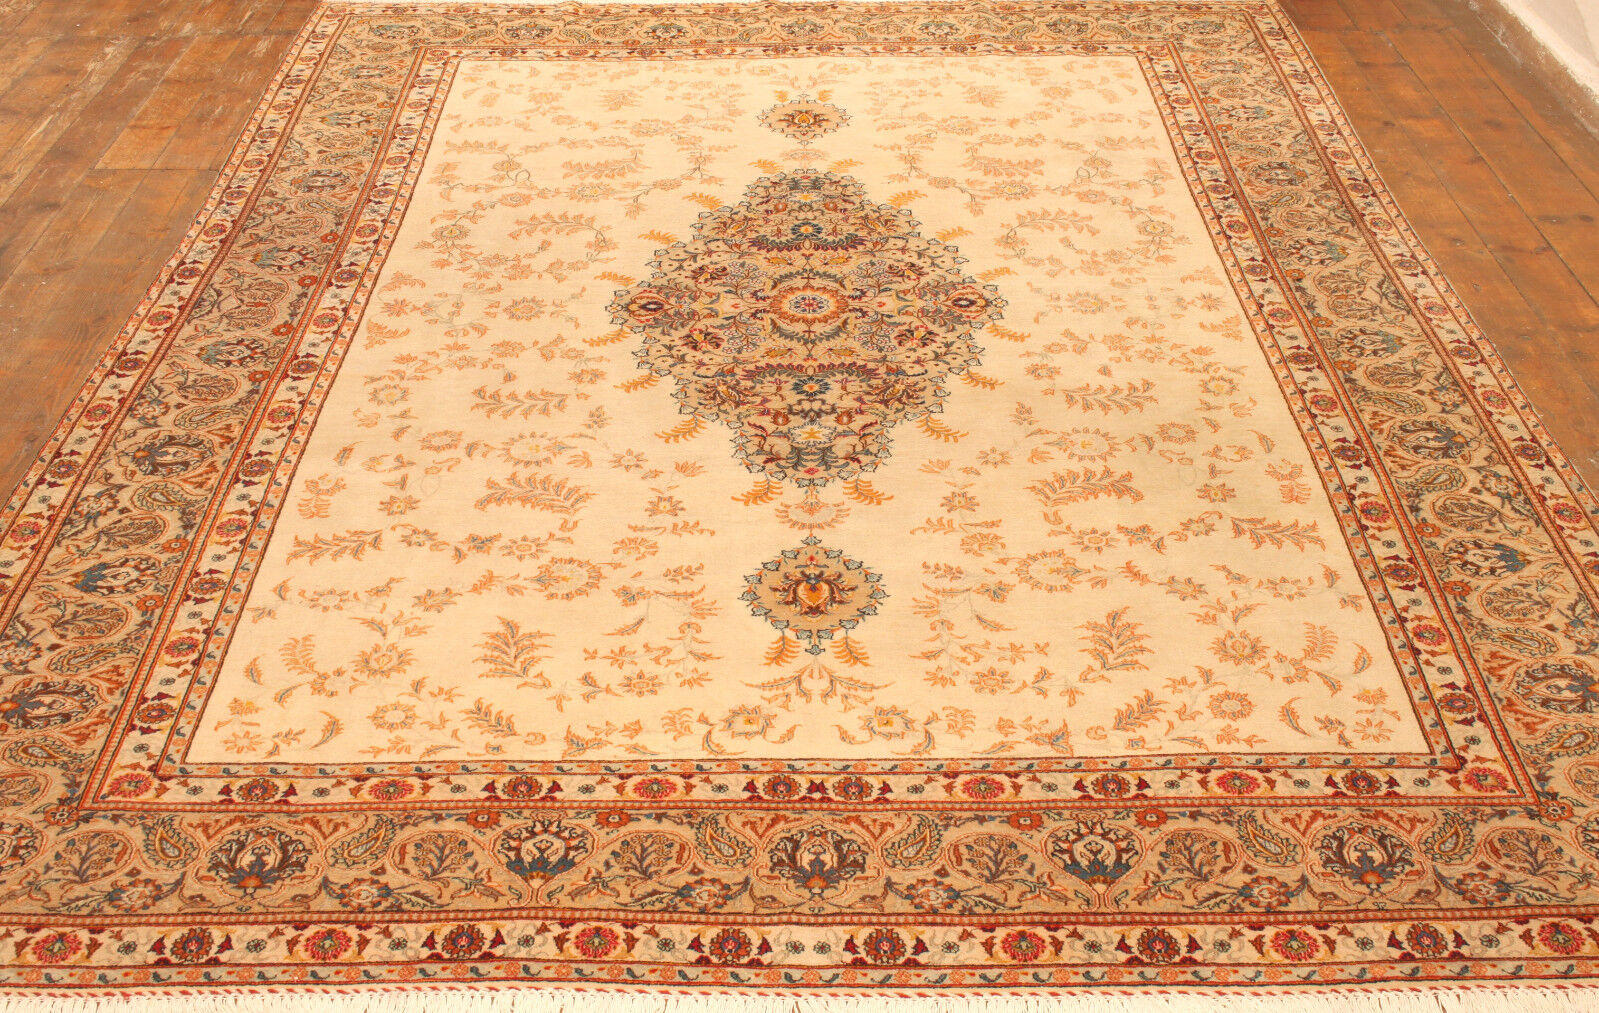 Close-up of the beautiful beige color of the Handmade Contemporary Persian Style Tabriz Rug